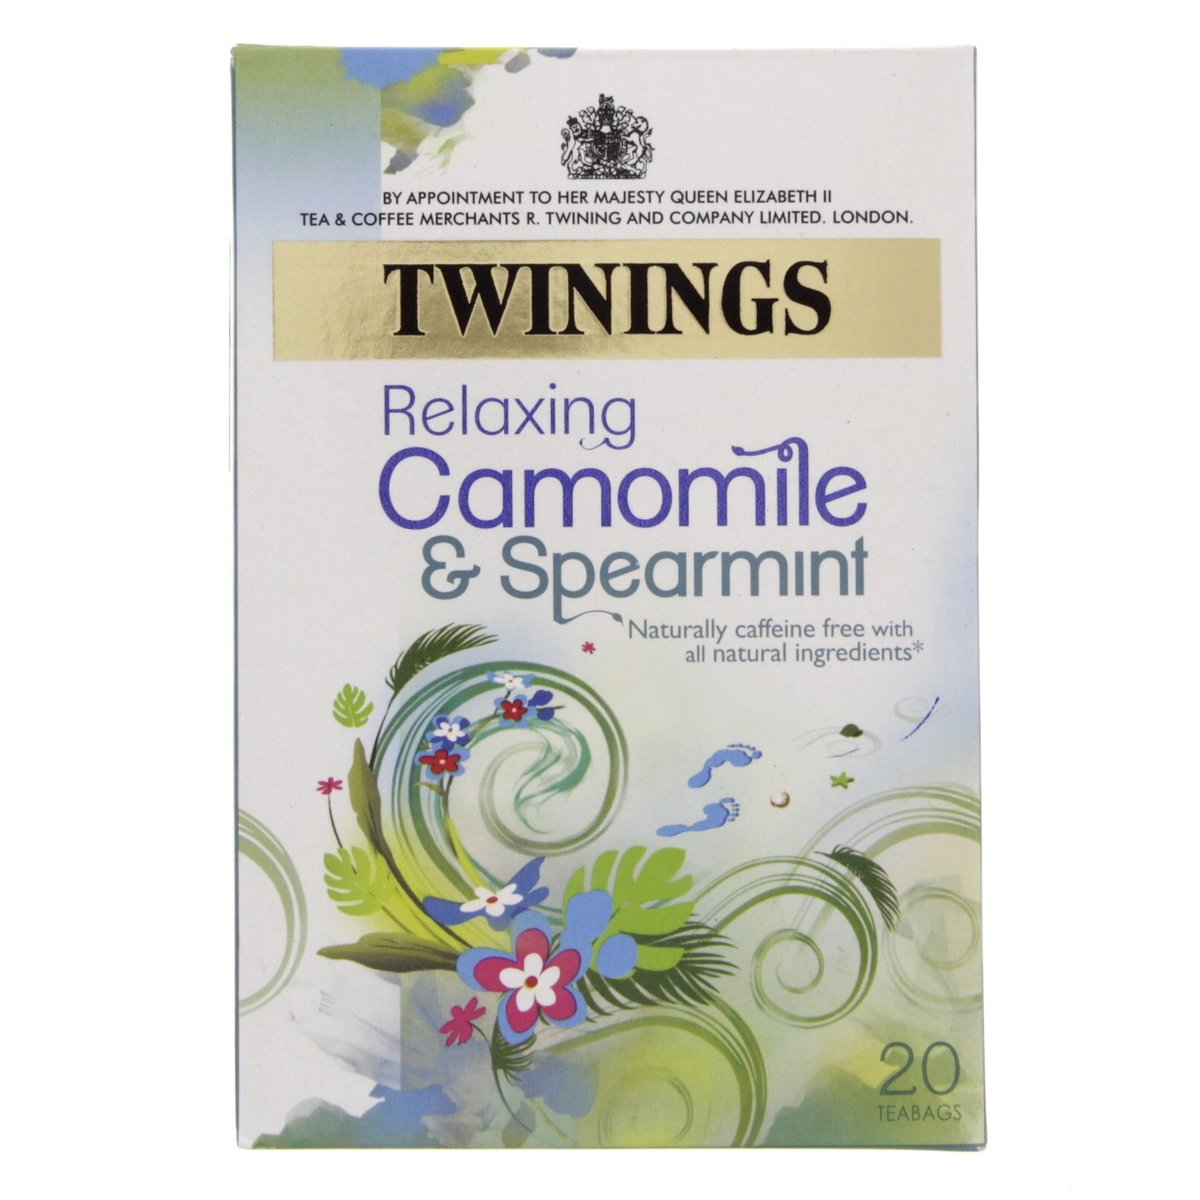 Twinings Relaxing Camomile And Spearmint Tea 20 pcs